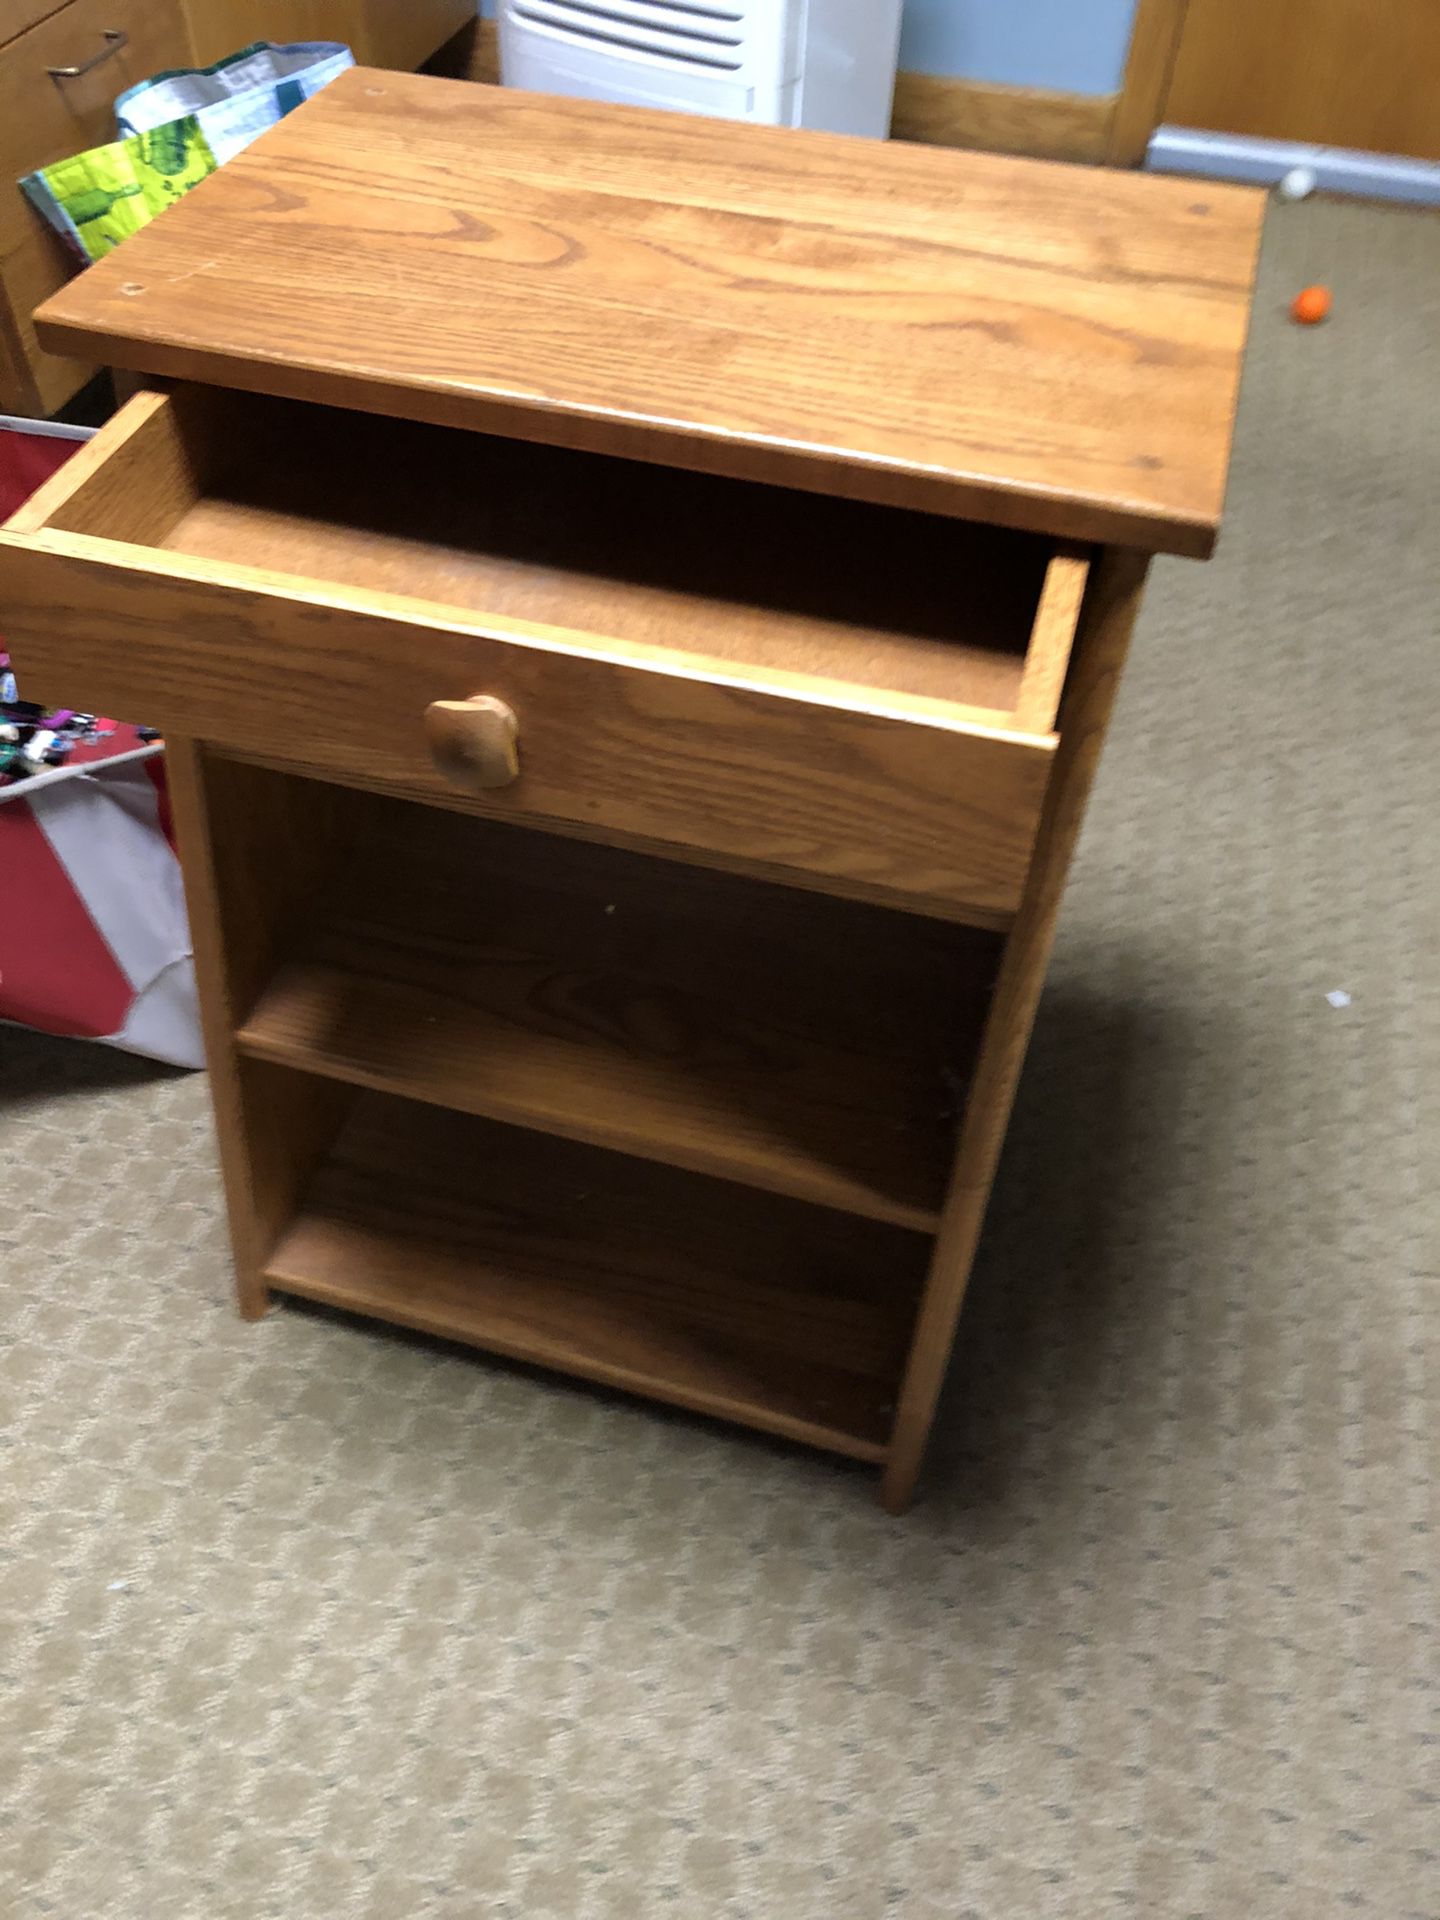 Real wood end table with shelves and drawers